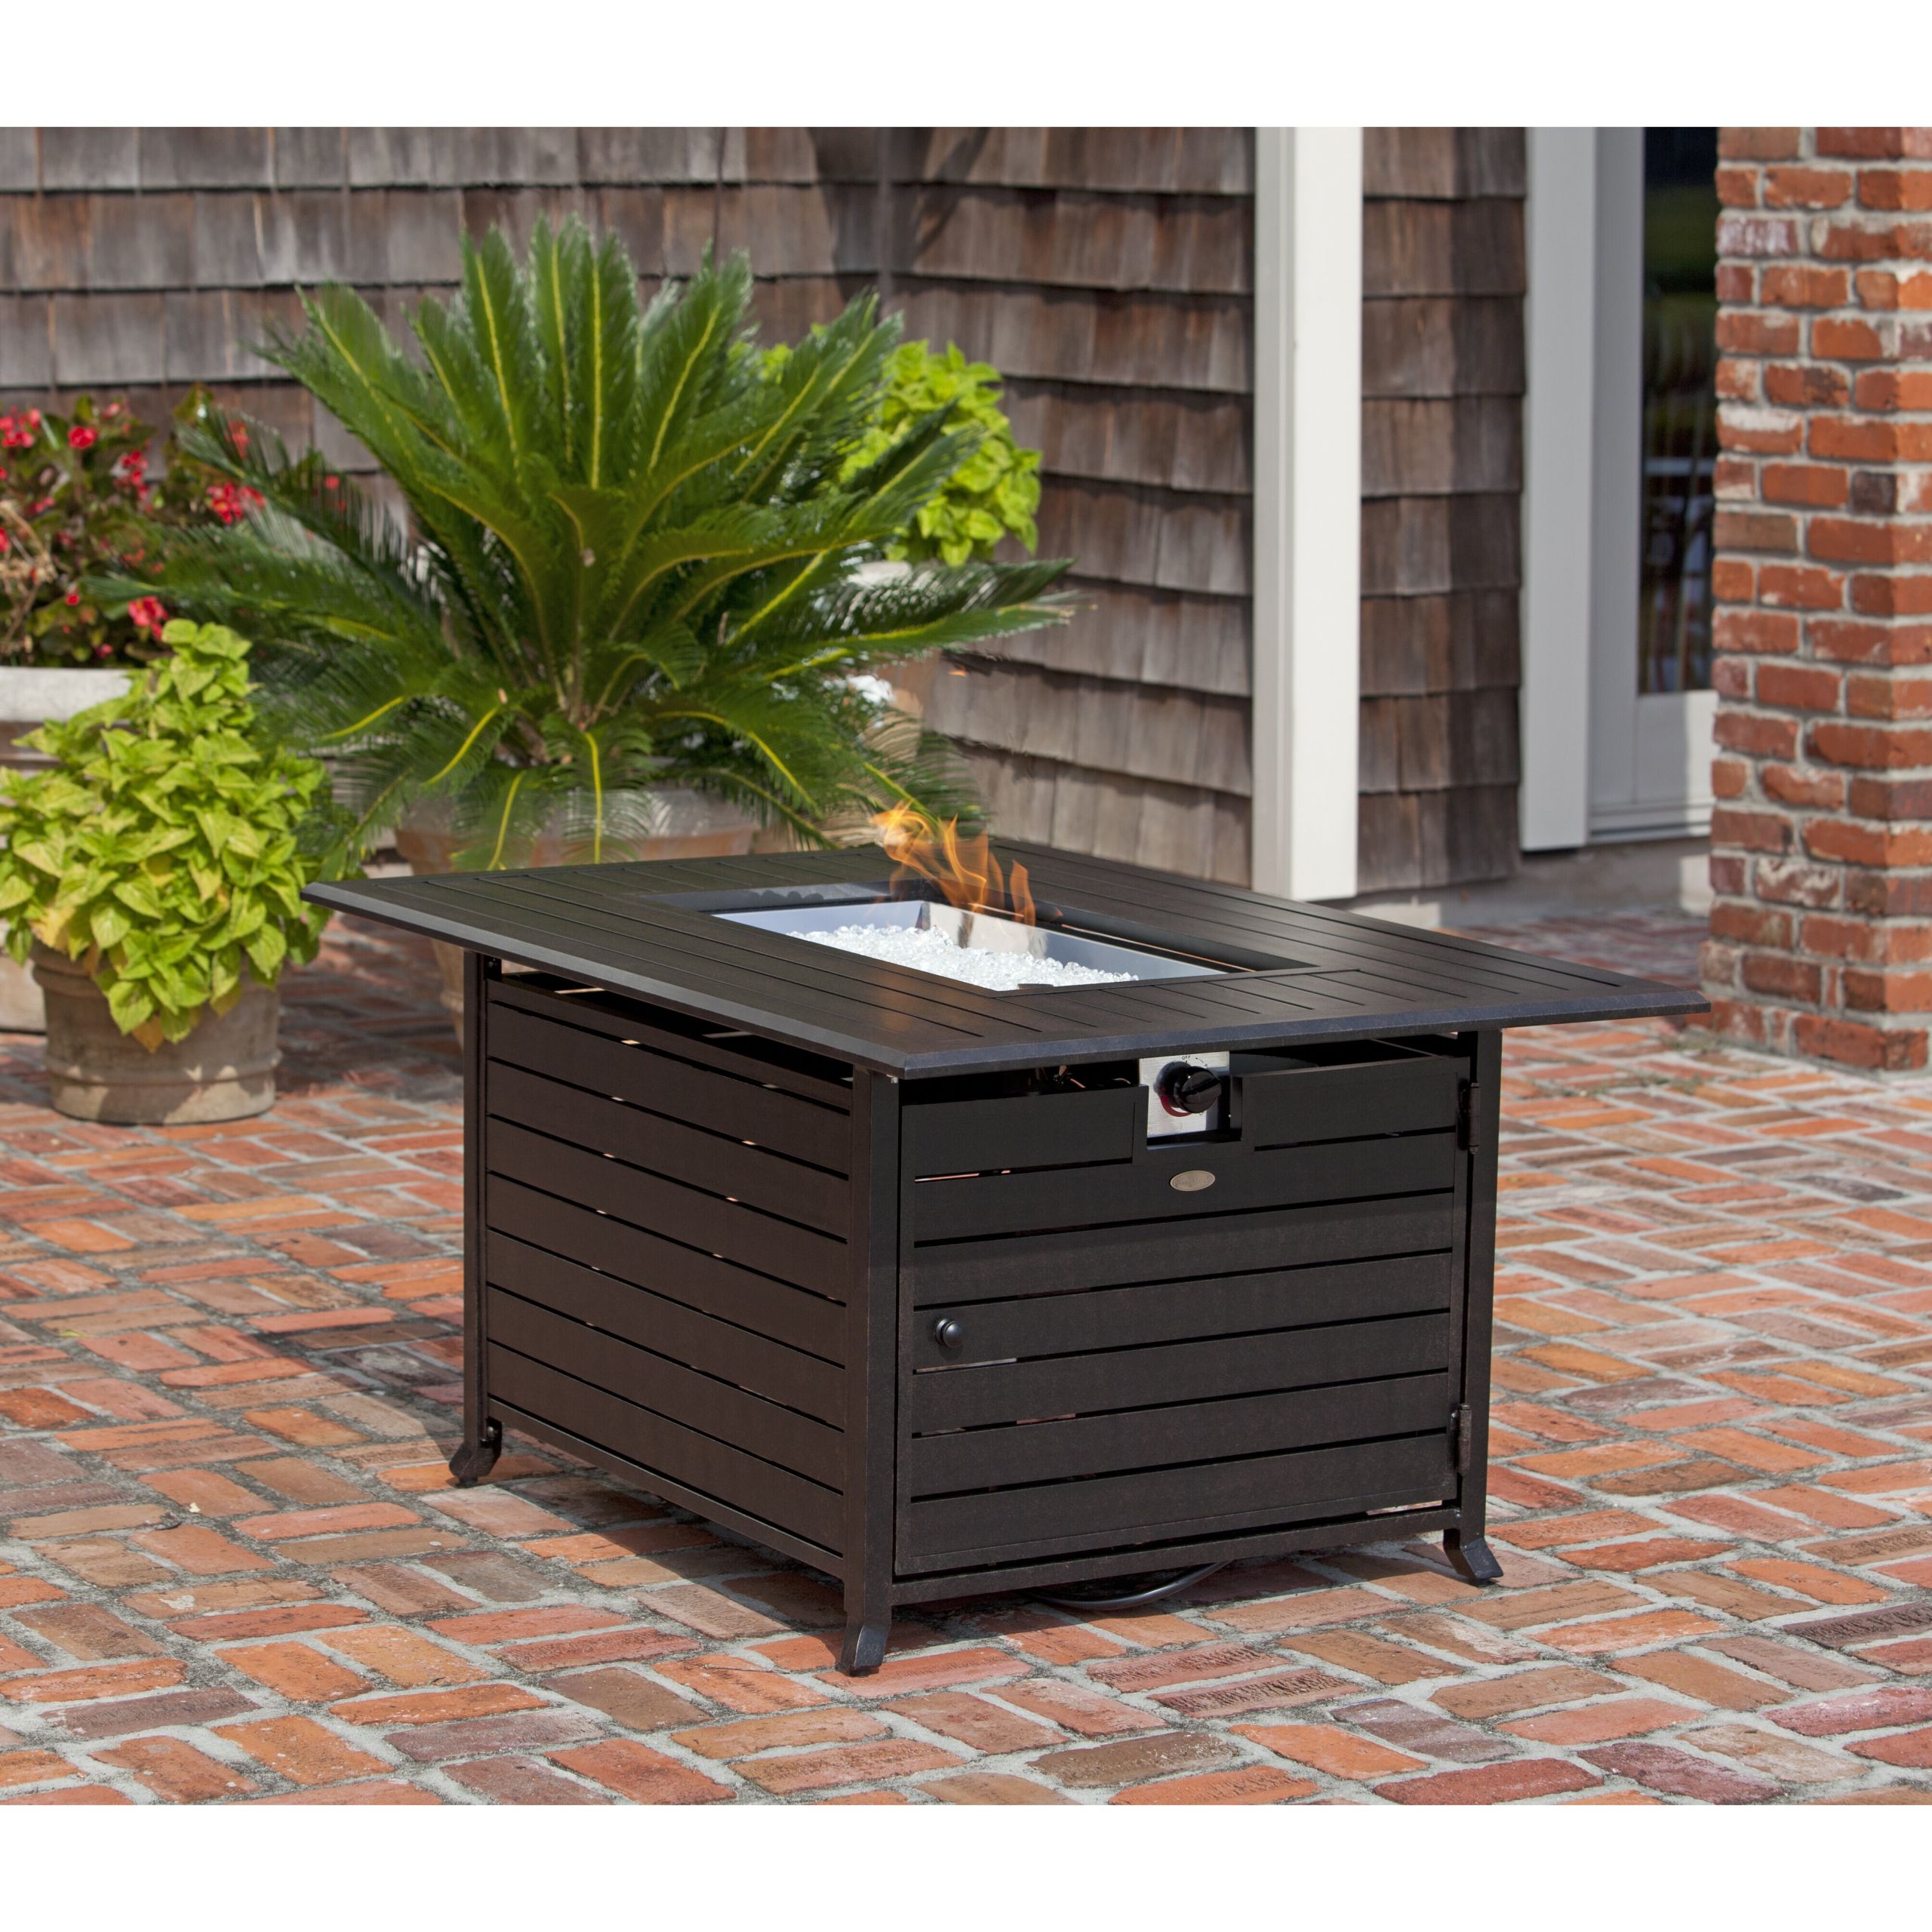 Propane Fire Pit Table
 Fire Sense Extruded Aluminum Propane Fire Pit Table